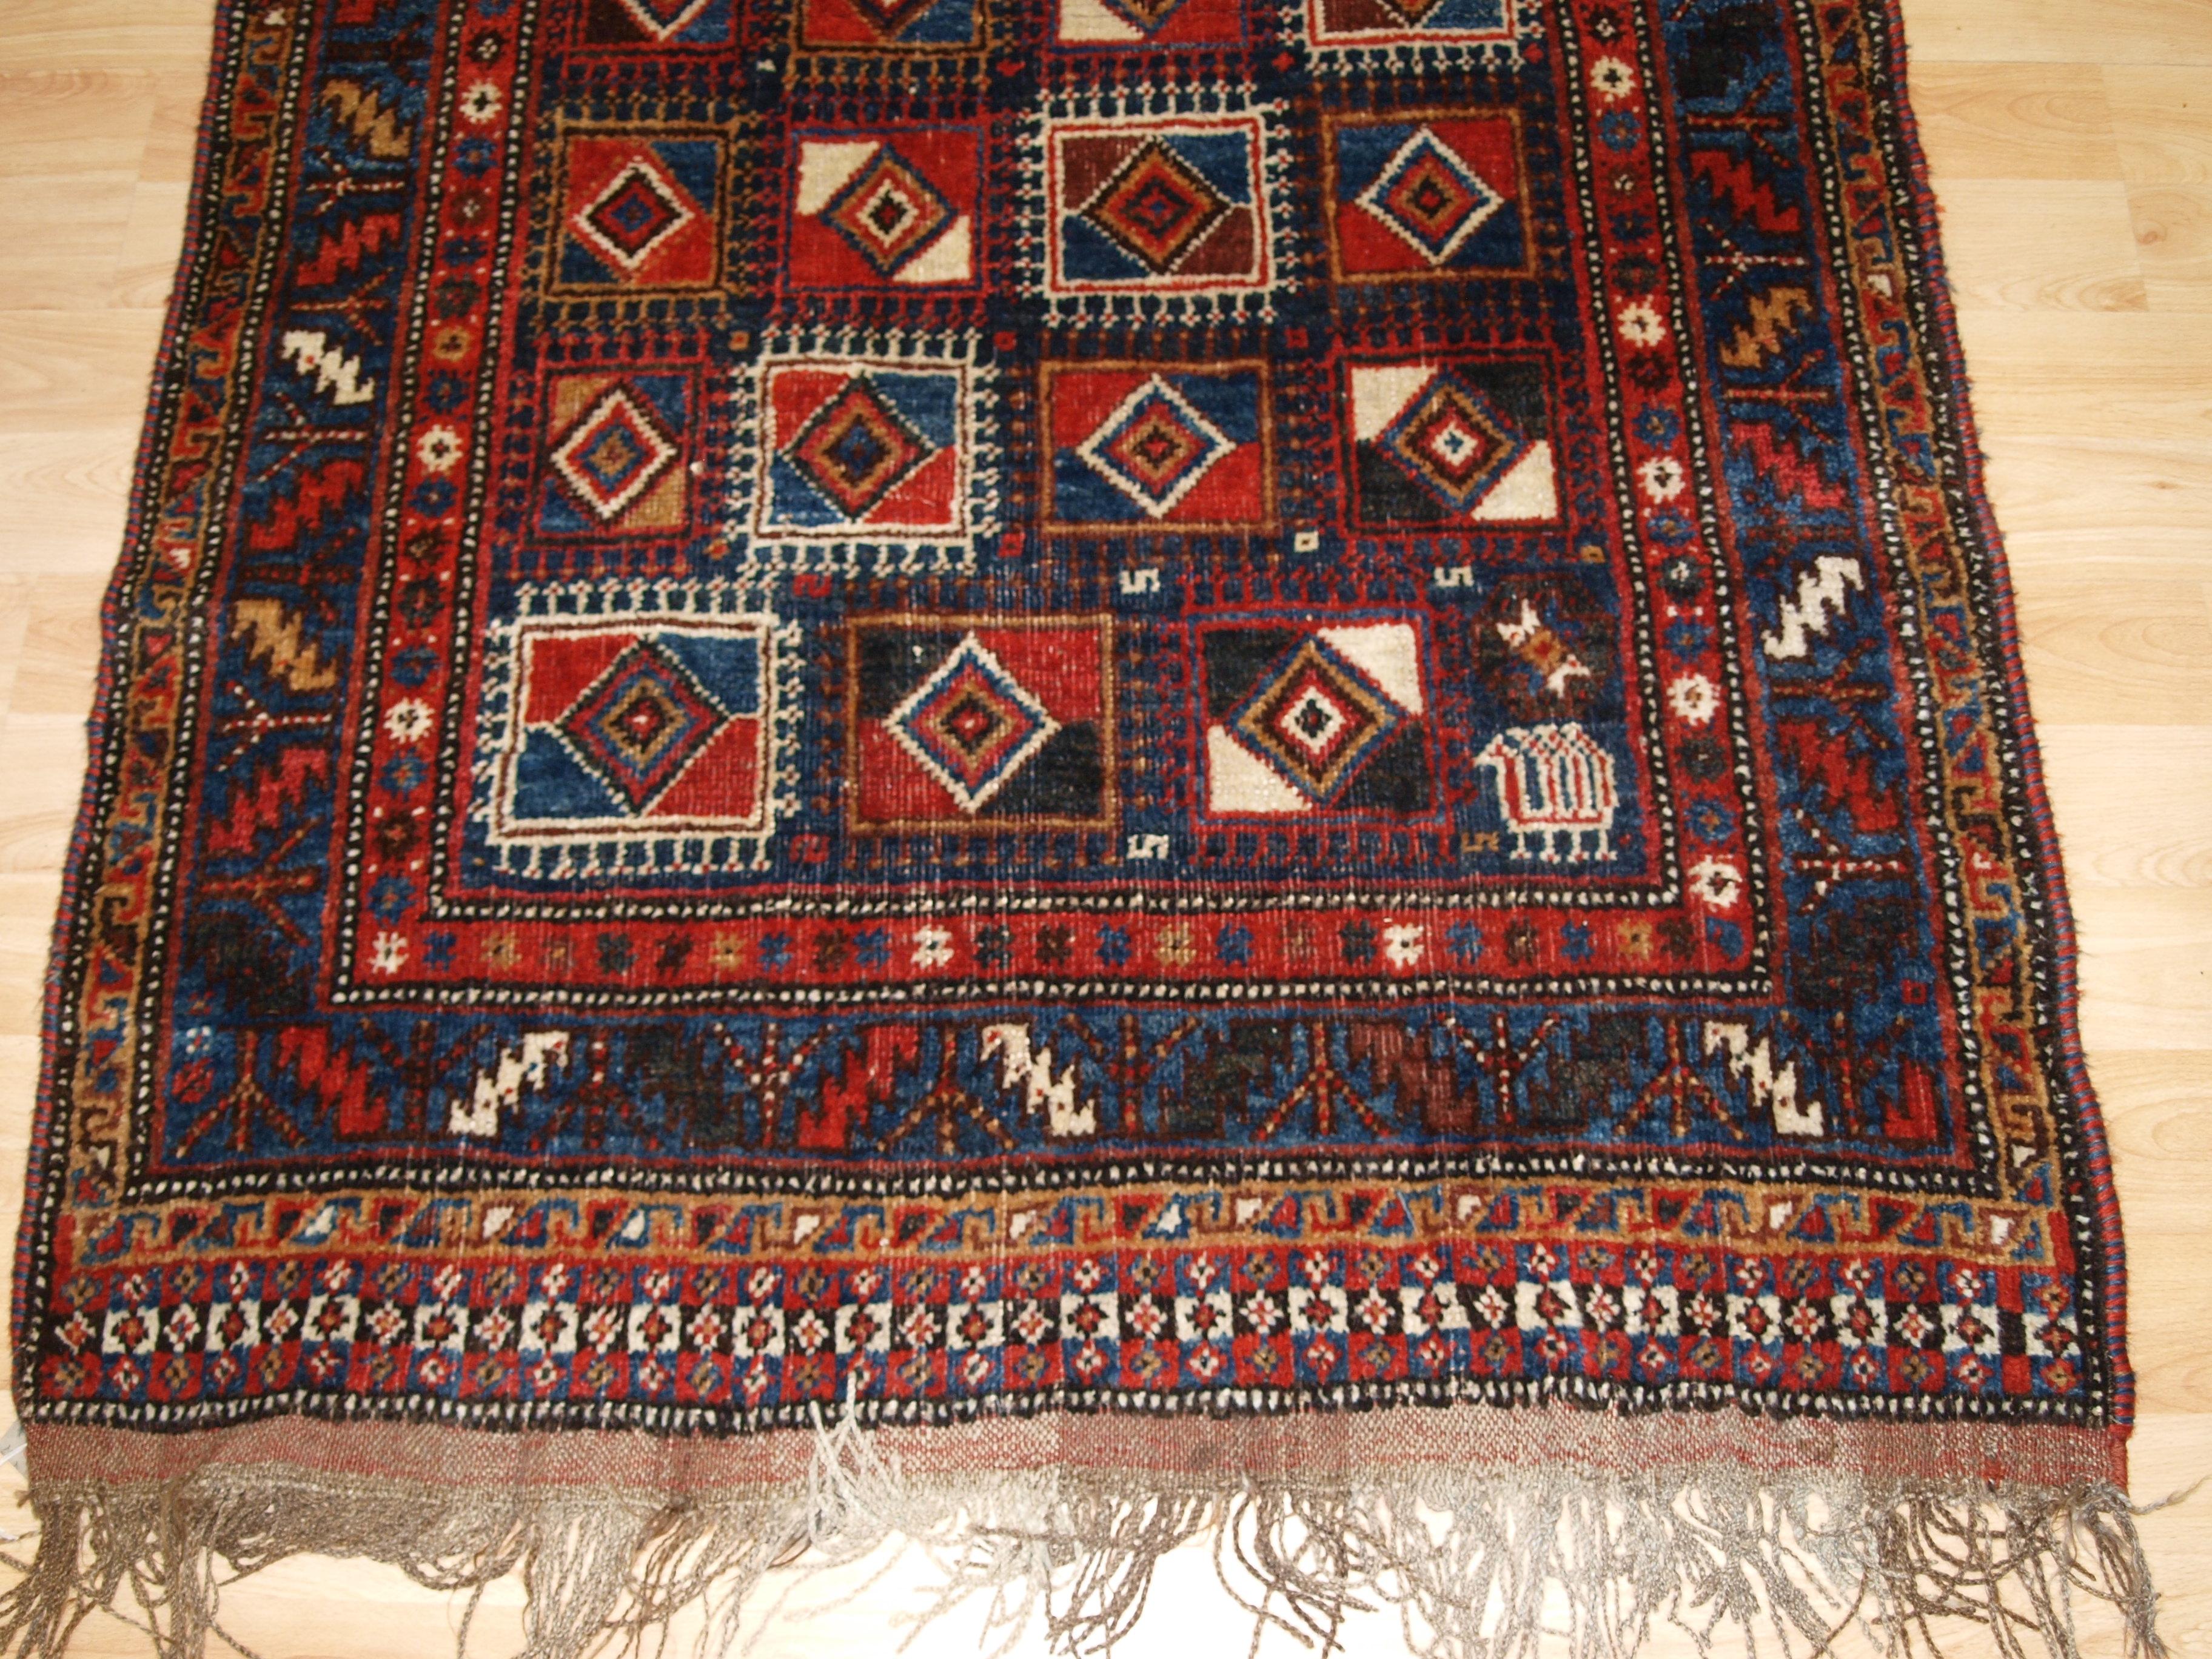 20th Century Qashqai Long Rug, with Very Unusual Box Design Usually Found on Kilims For Sale